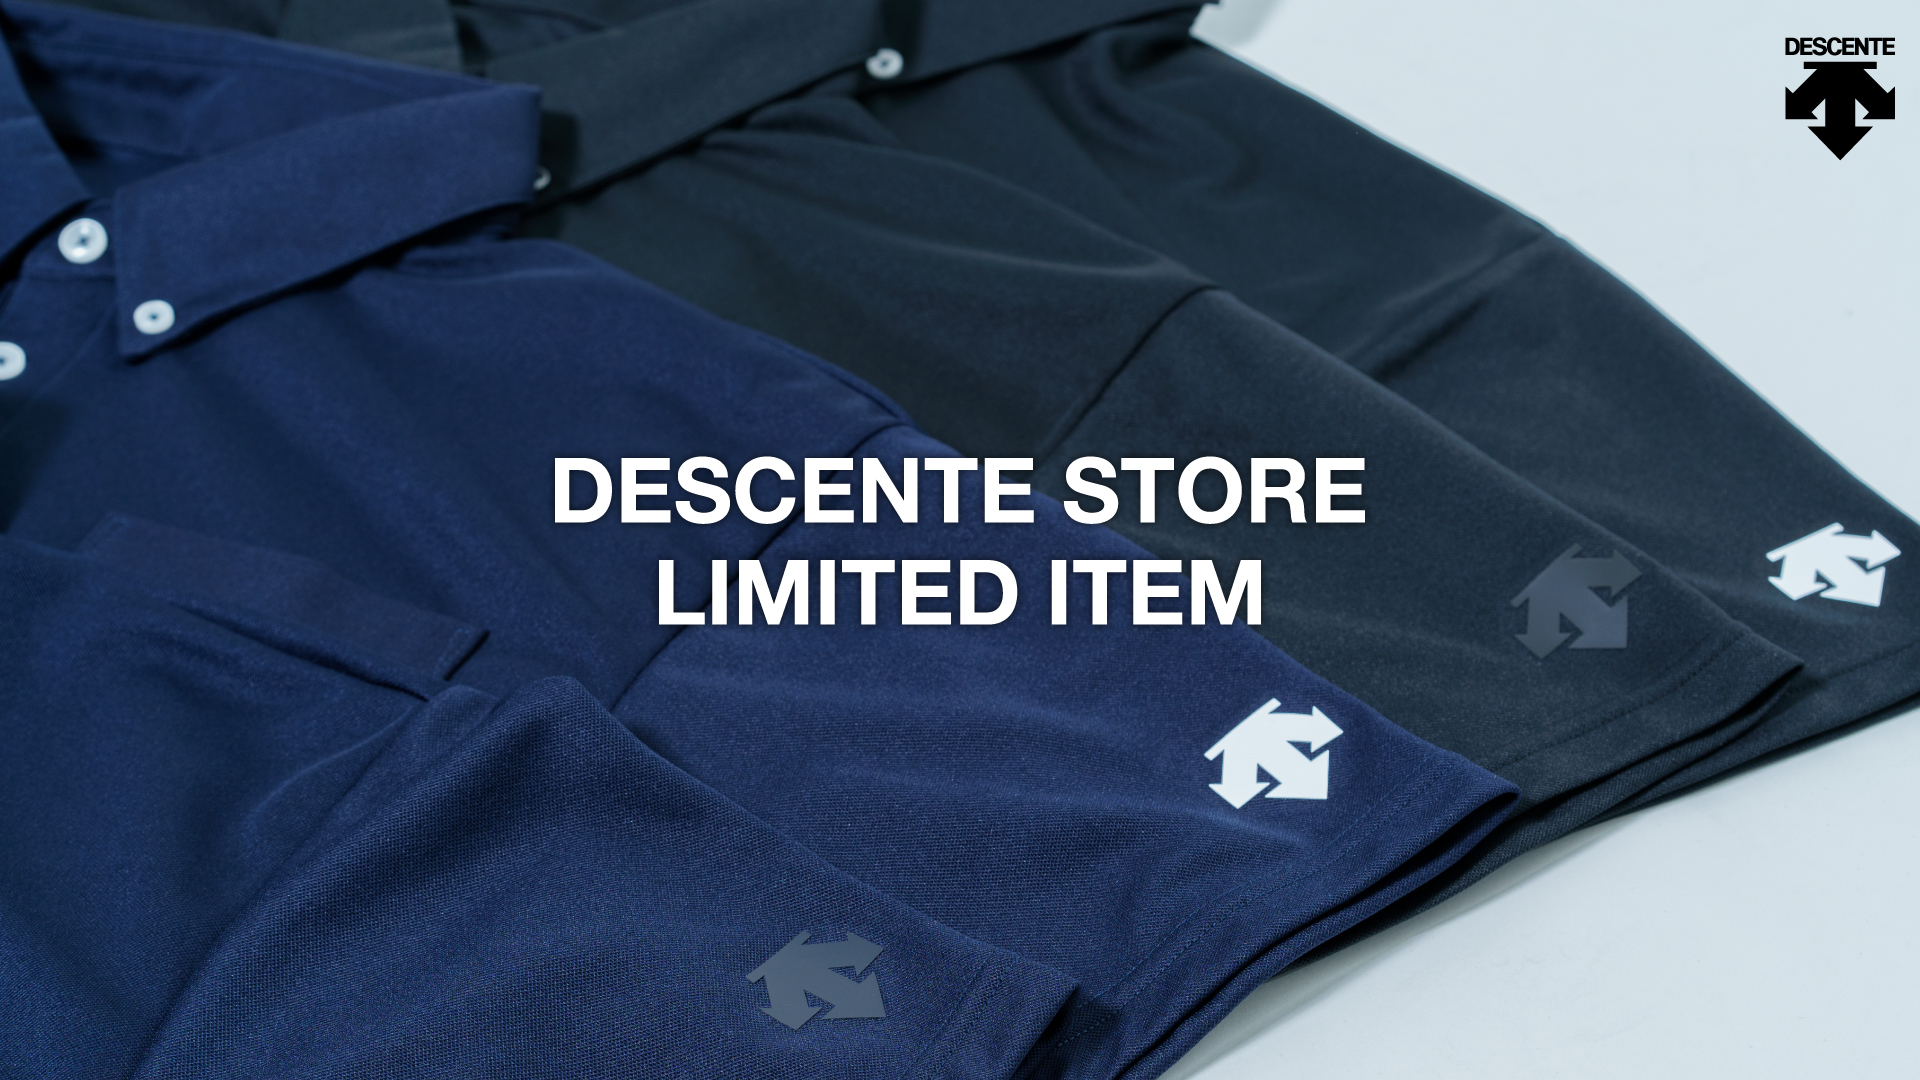 DESCENTE STORE LIMITED ITEM / デサントストア限定アイテム【公式通販 